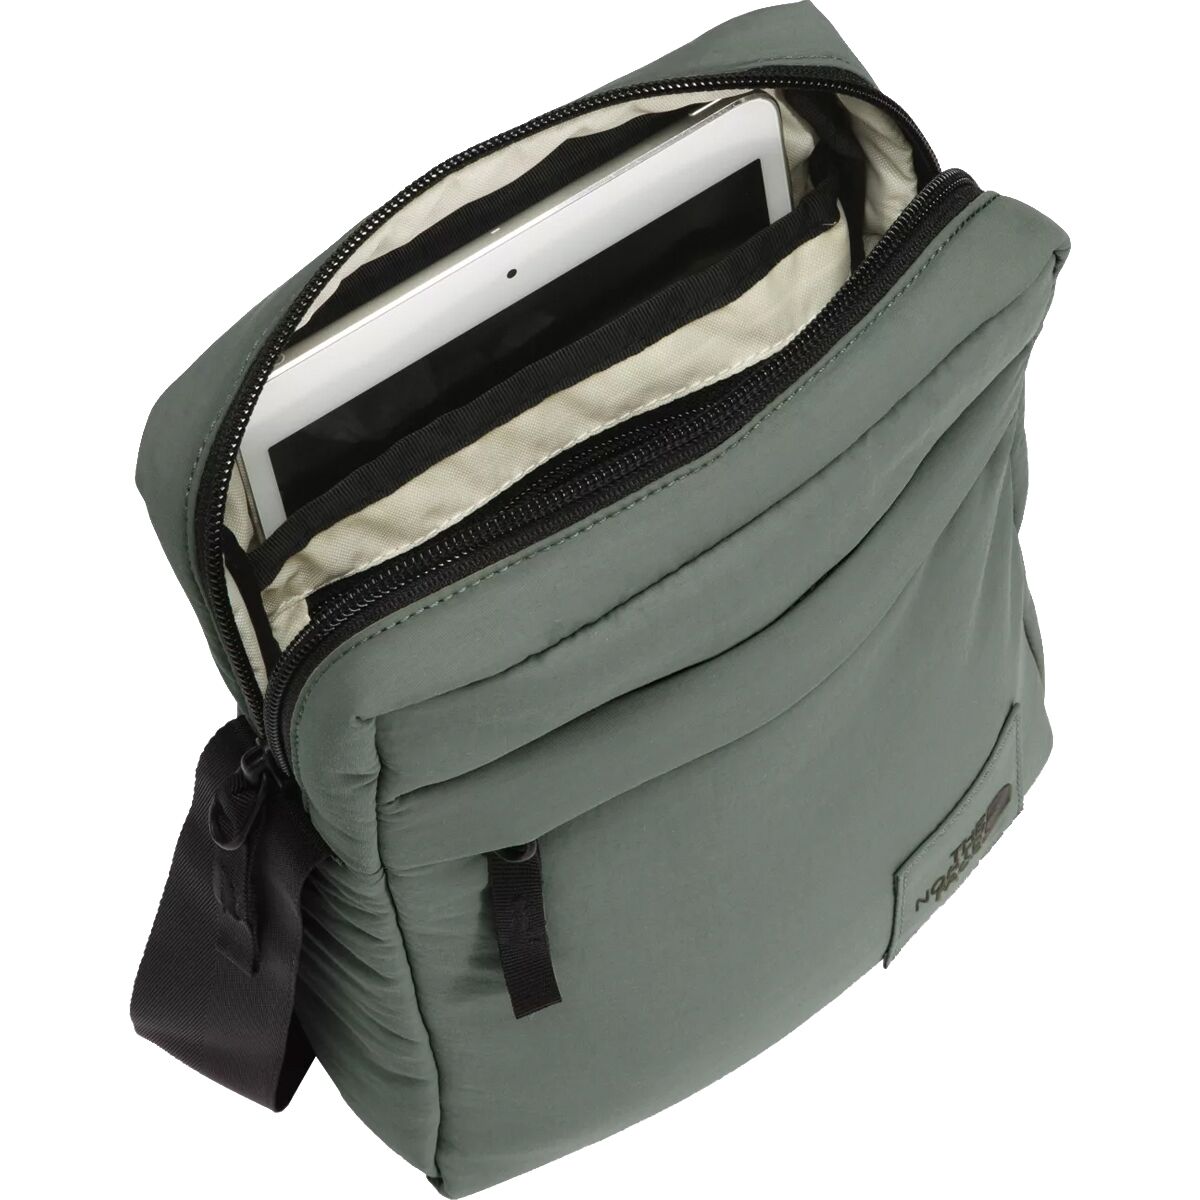 Timbuk2 Command messenger bag for Sale in West Palm Beach